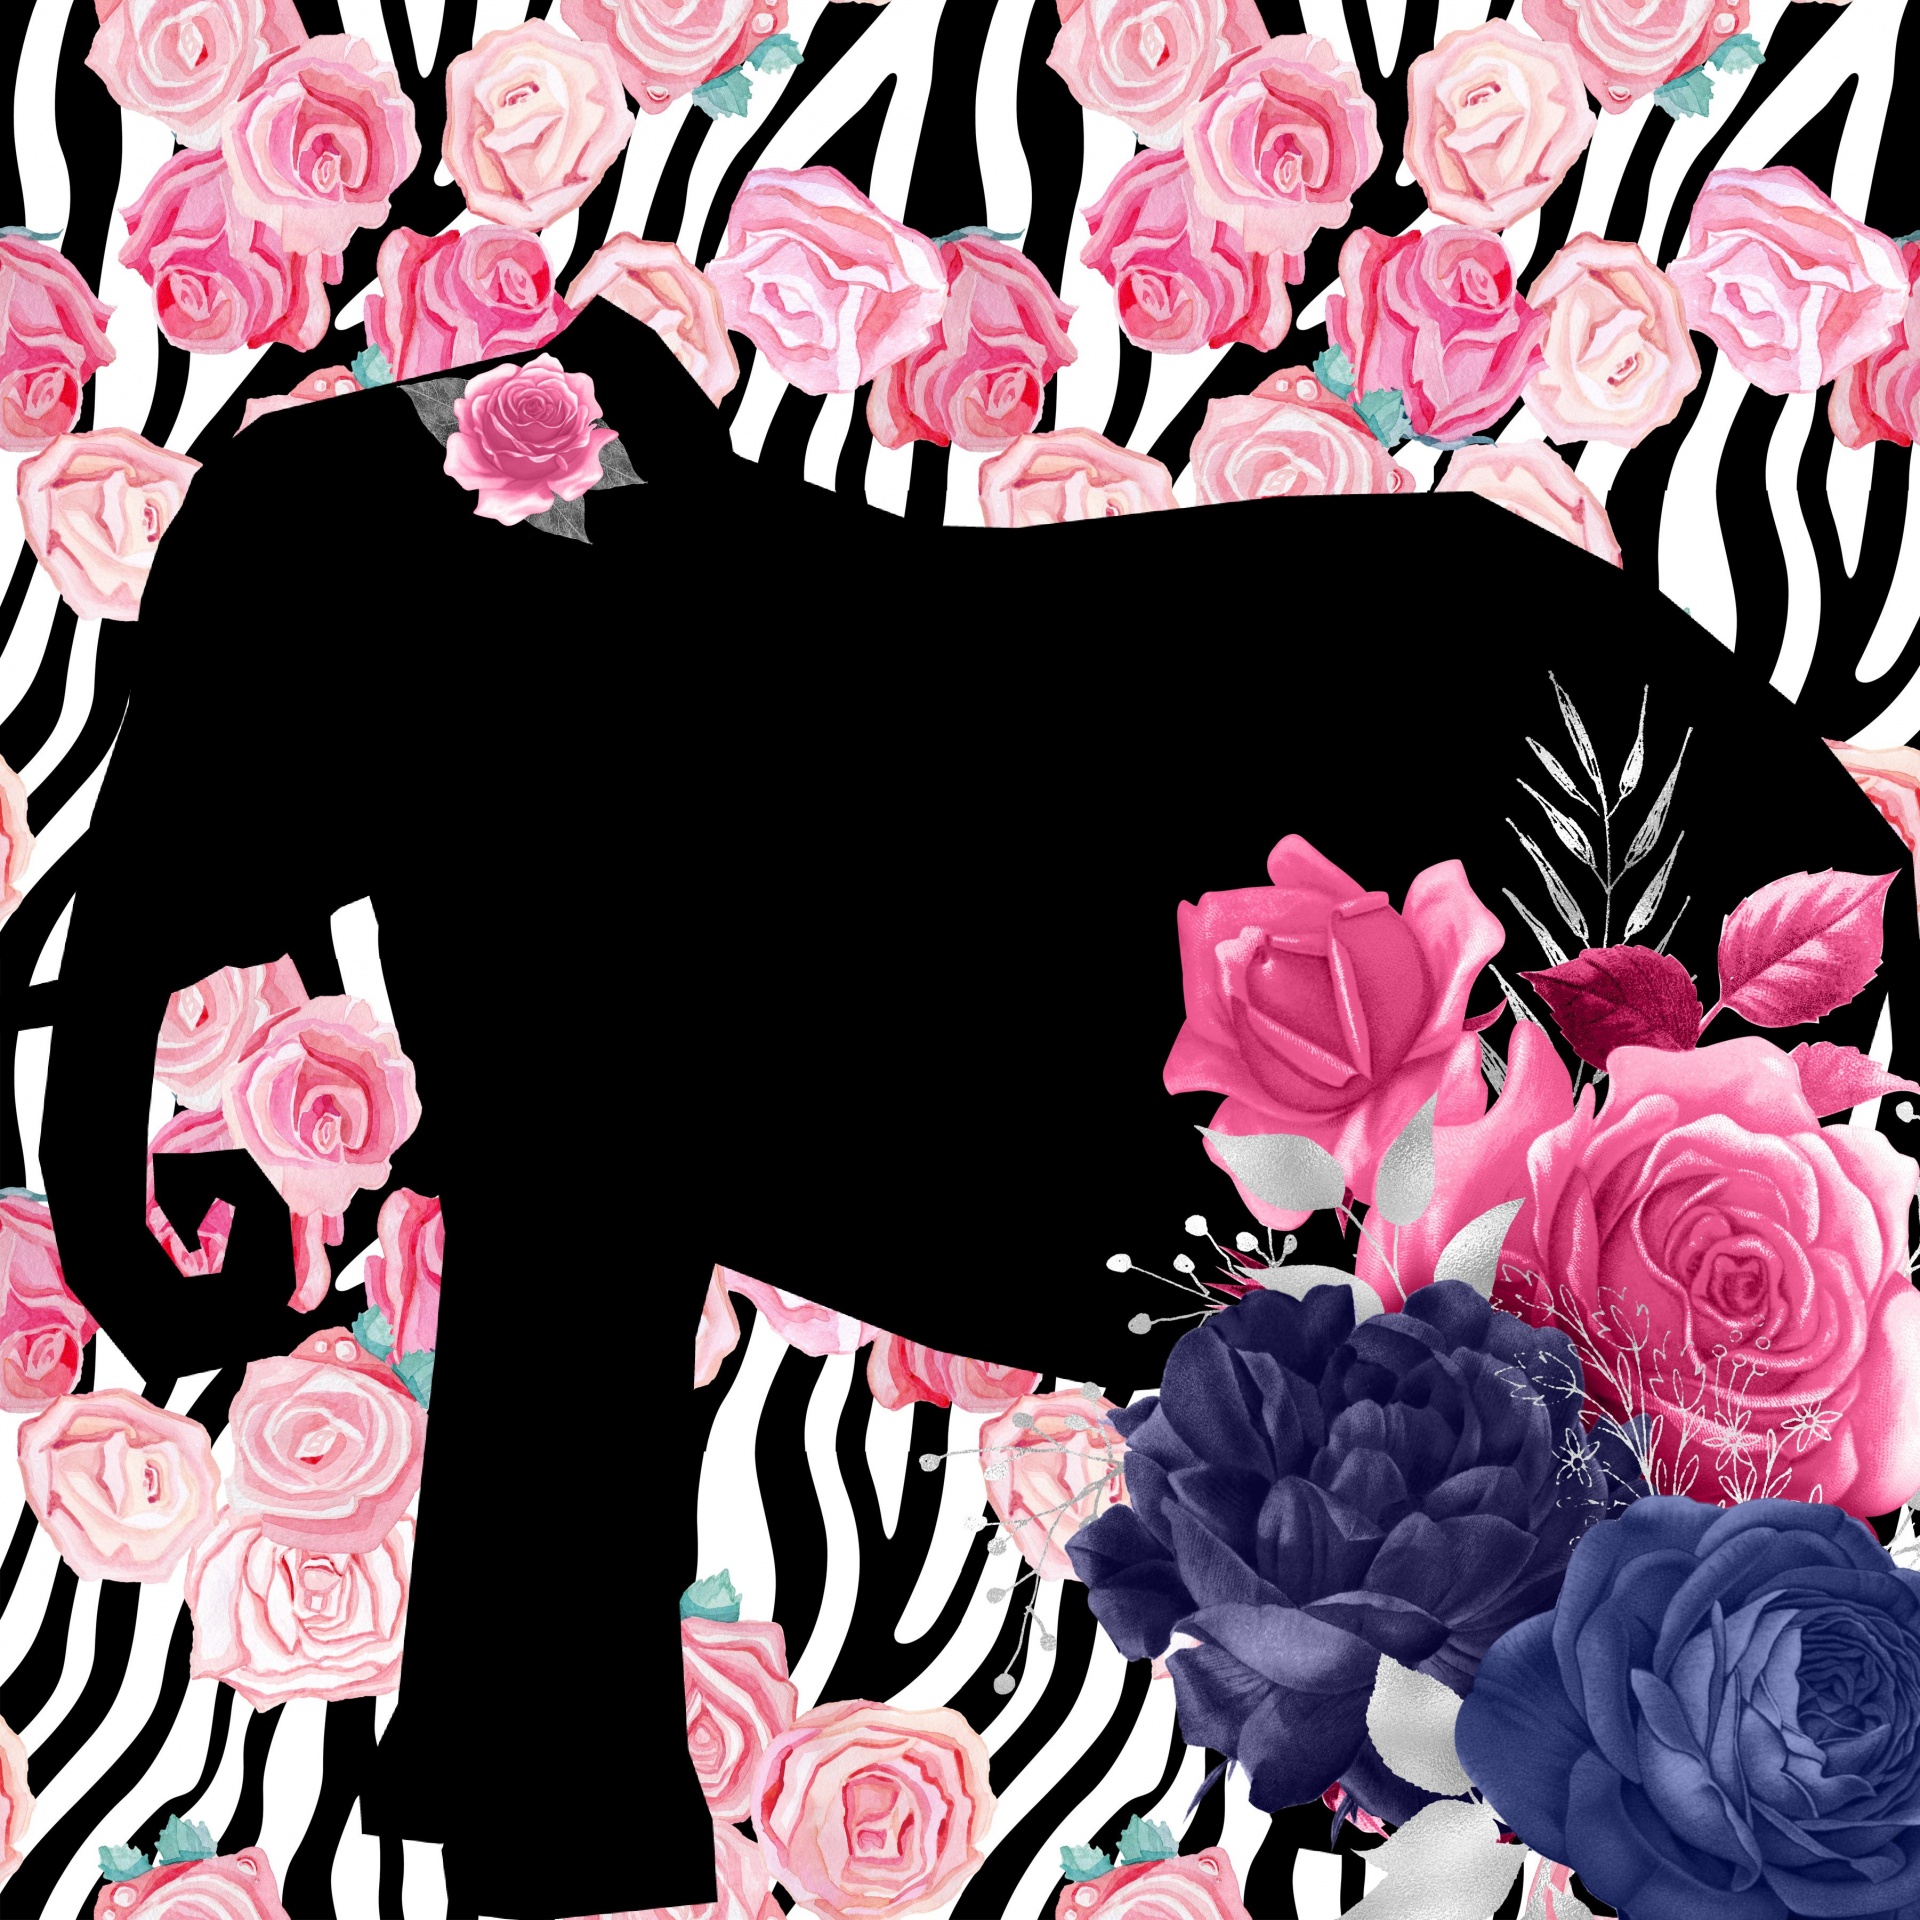 silhouette of an elephant on a rose and zebra pattern background